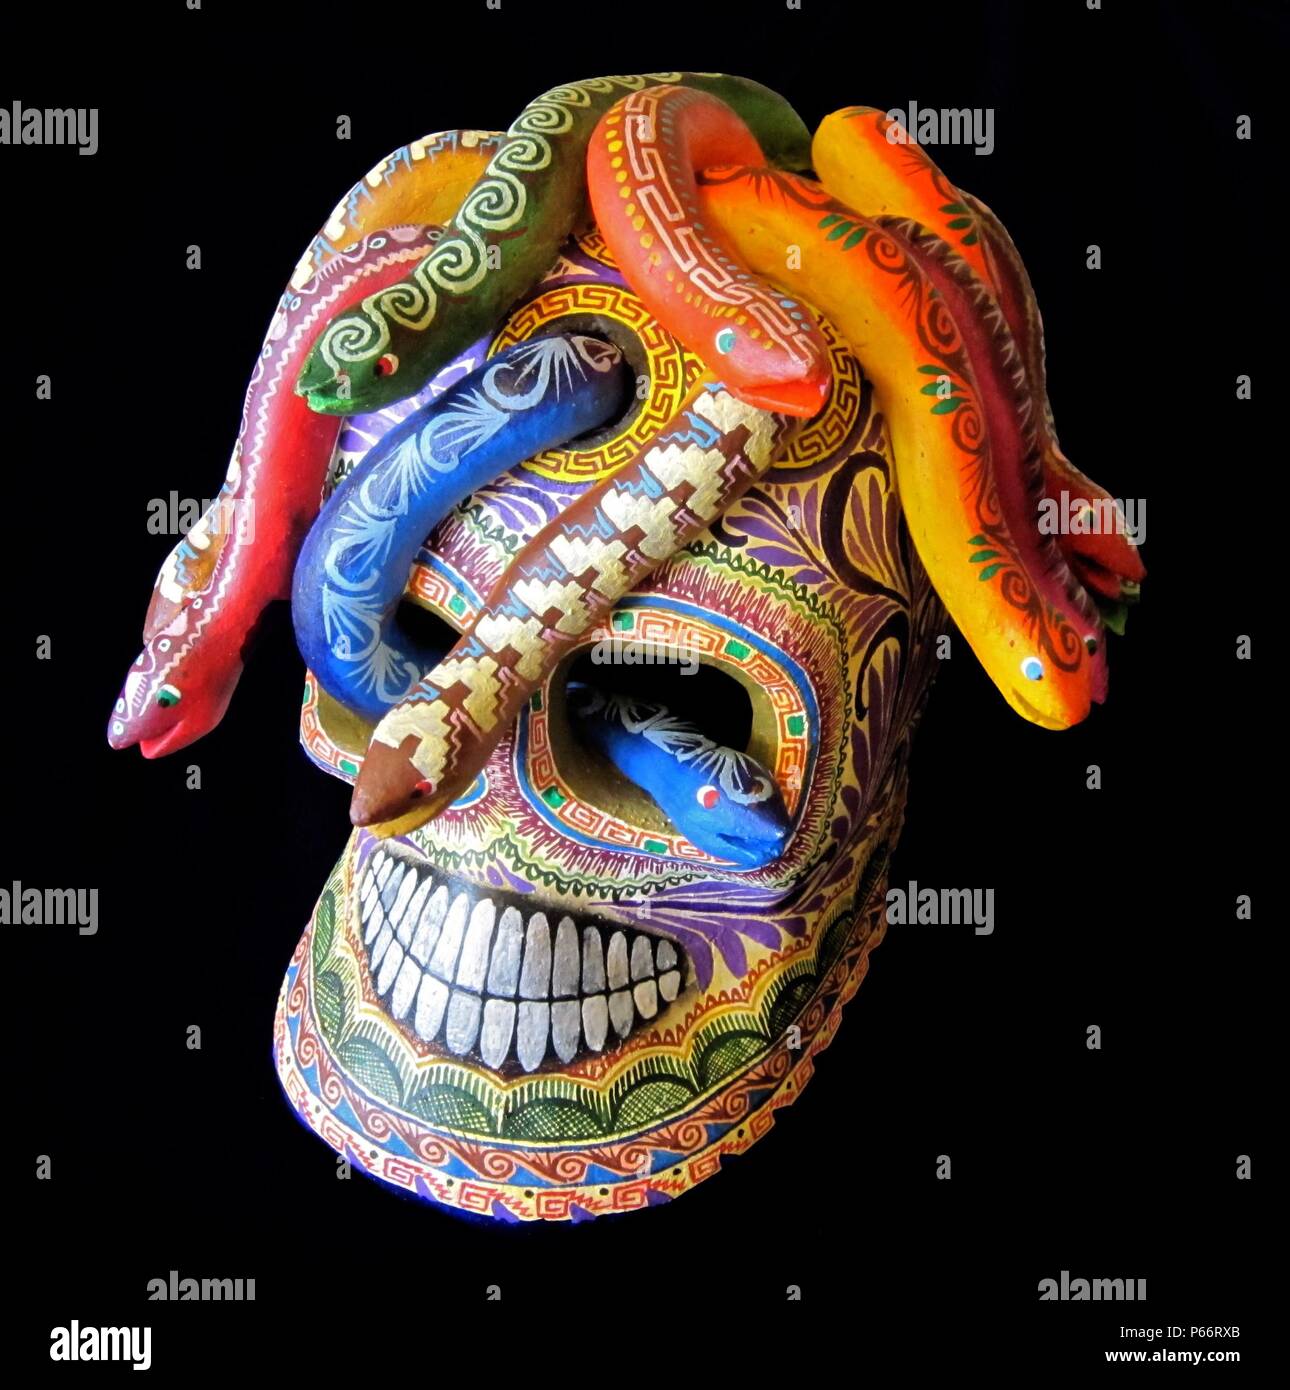 Mexican Puebla Medusa skull, by Saul Montesinos, 2010. Fourteen coloured snakes emerge from holes in the top of the skull and another from an eye socket. Ht: 6 in; 15 cm. Stock Photo